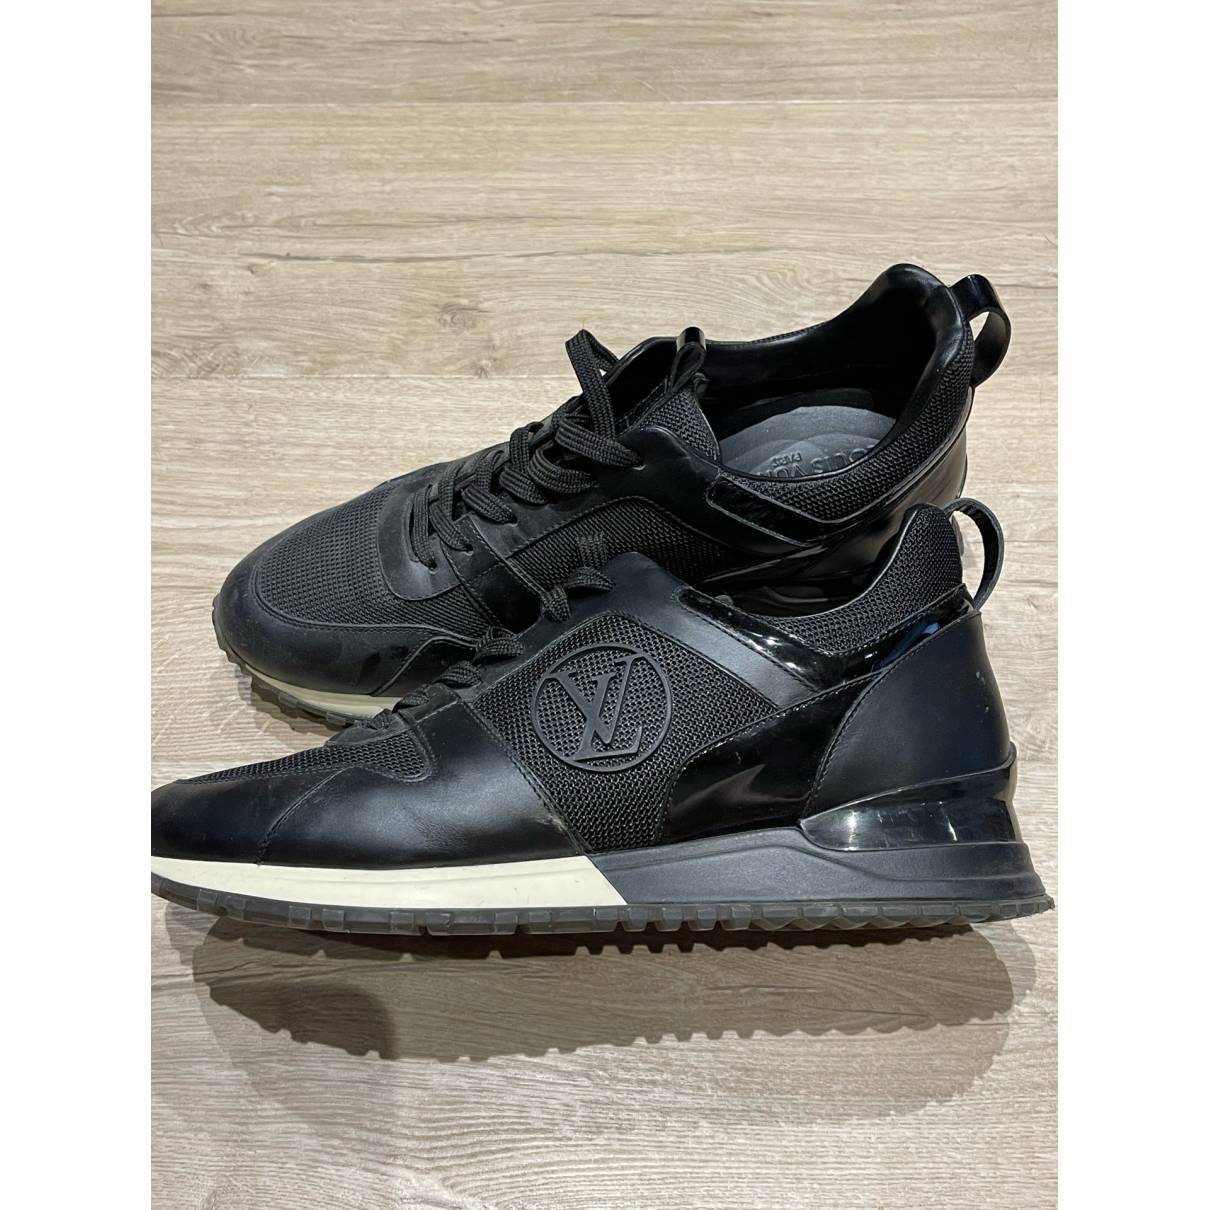 Run away leather low trainers Louis Vuitton Black size 48 EU in Leather -  28947102